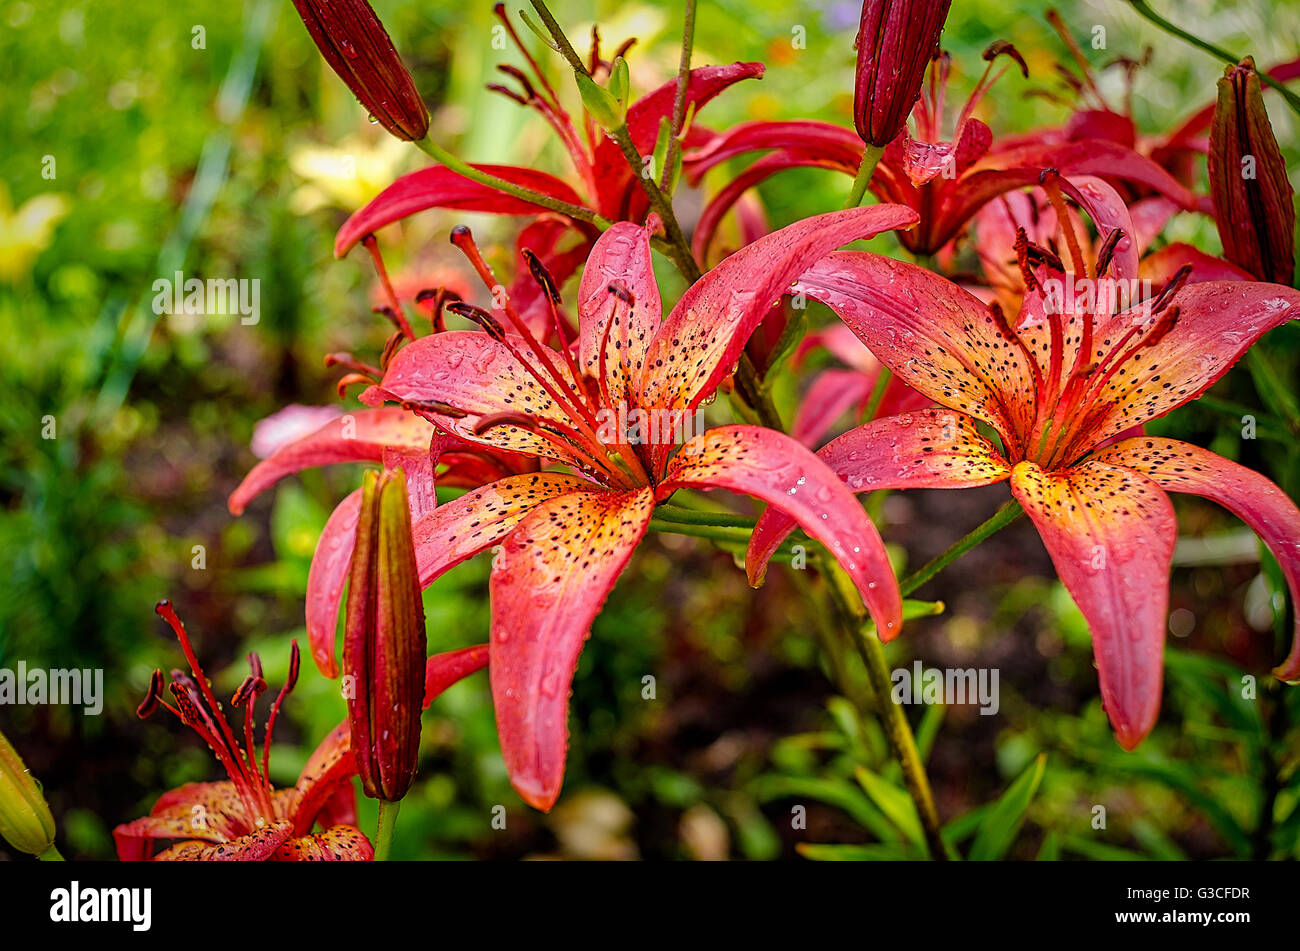 Lily garden flowers Stock Photo